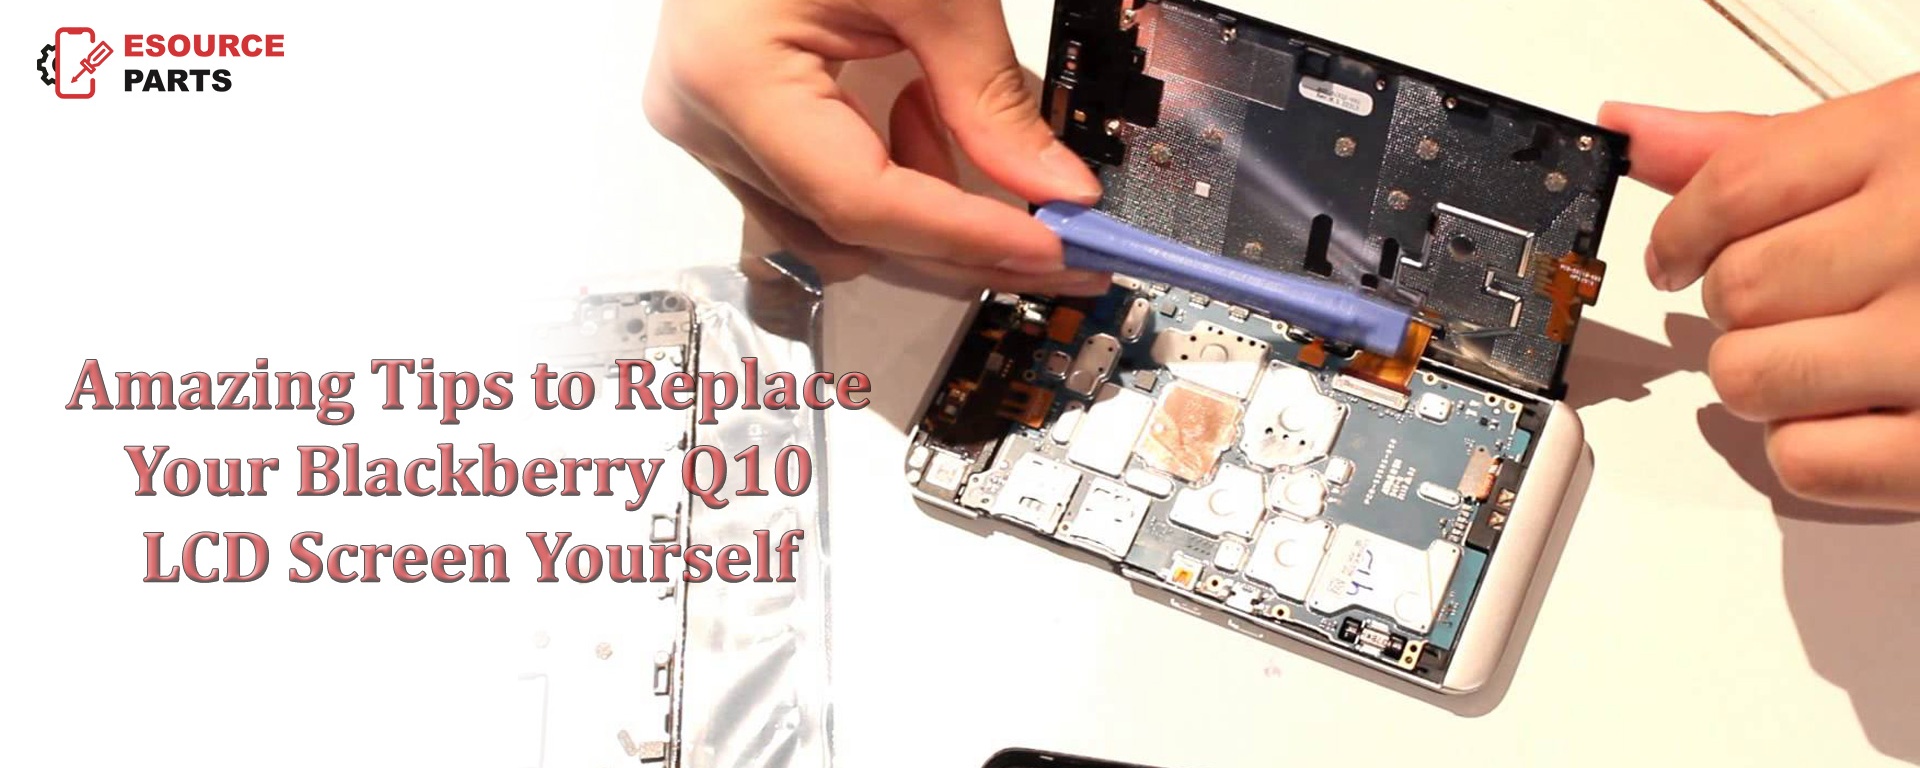 Amazing Tips to Replace Your Blackberry Q10 LCD Screen Yourself